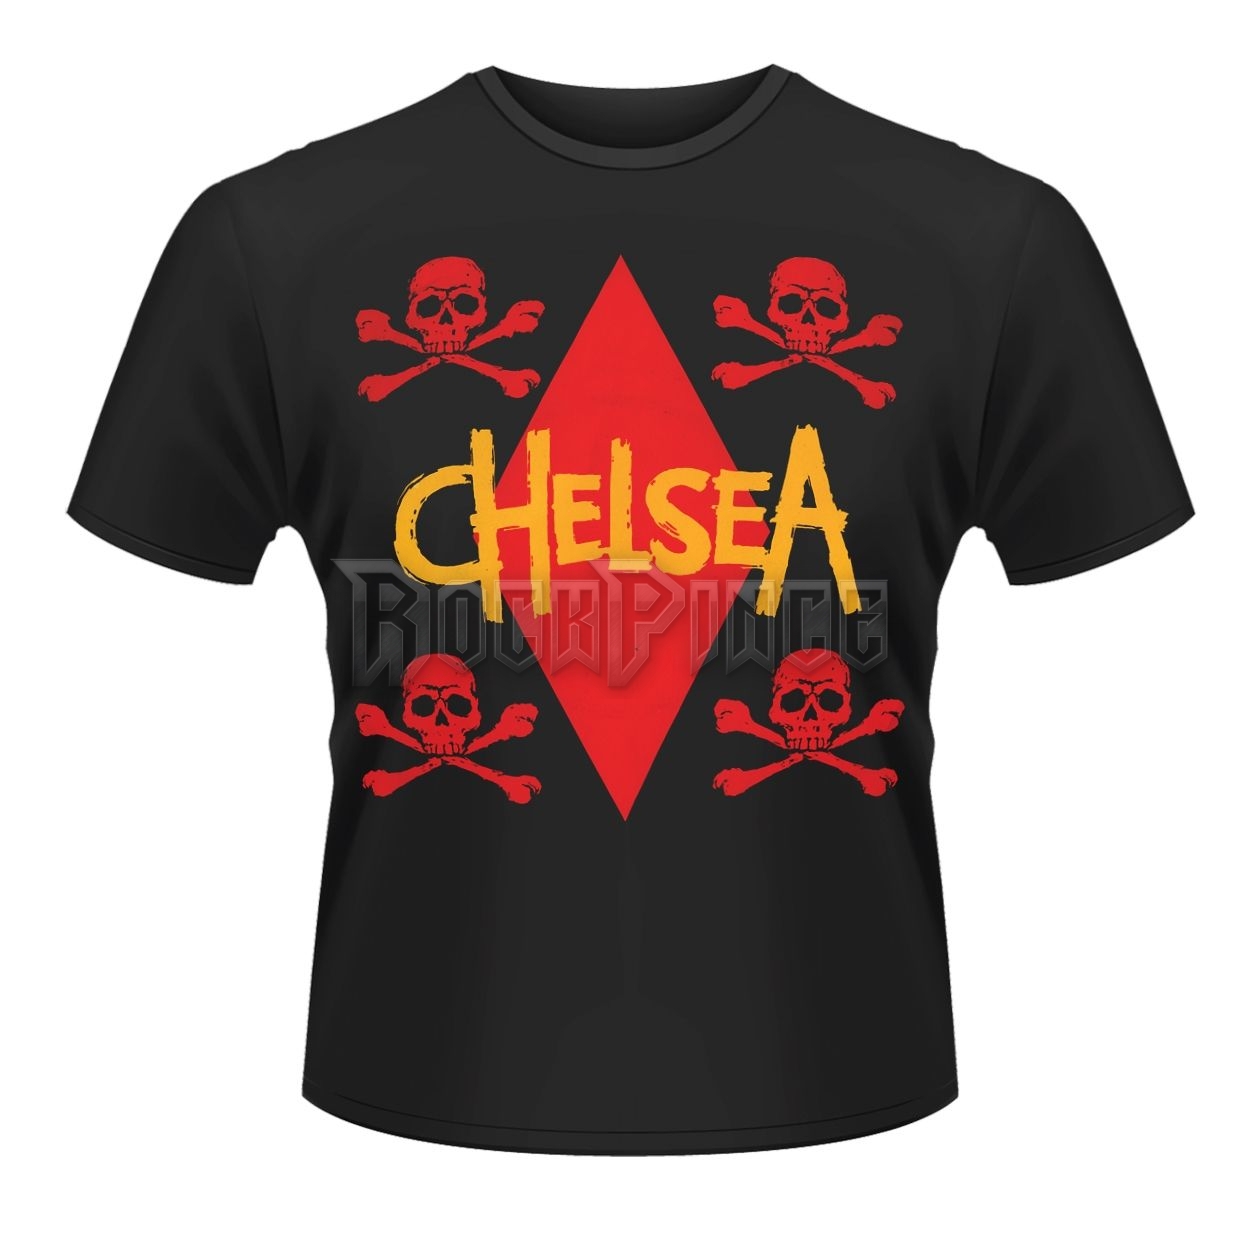 CHELSEA - STAND OUT - PH9663